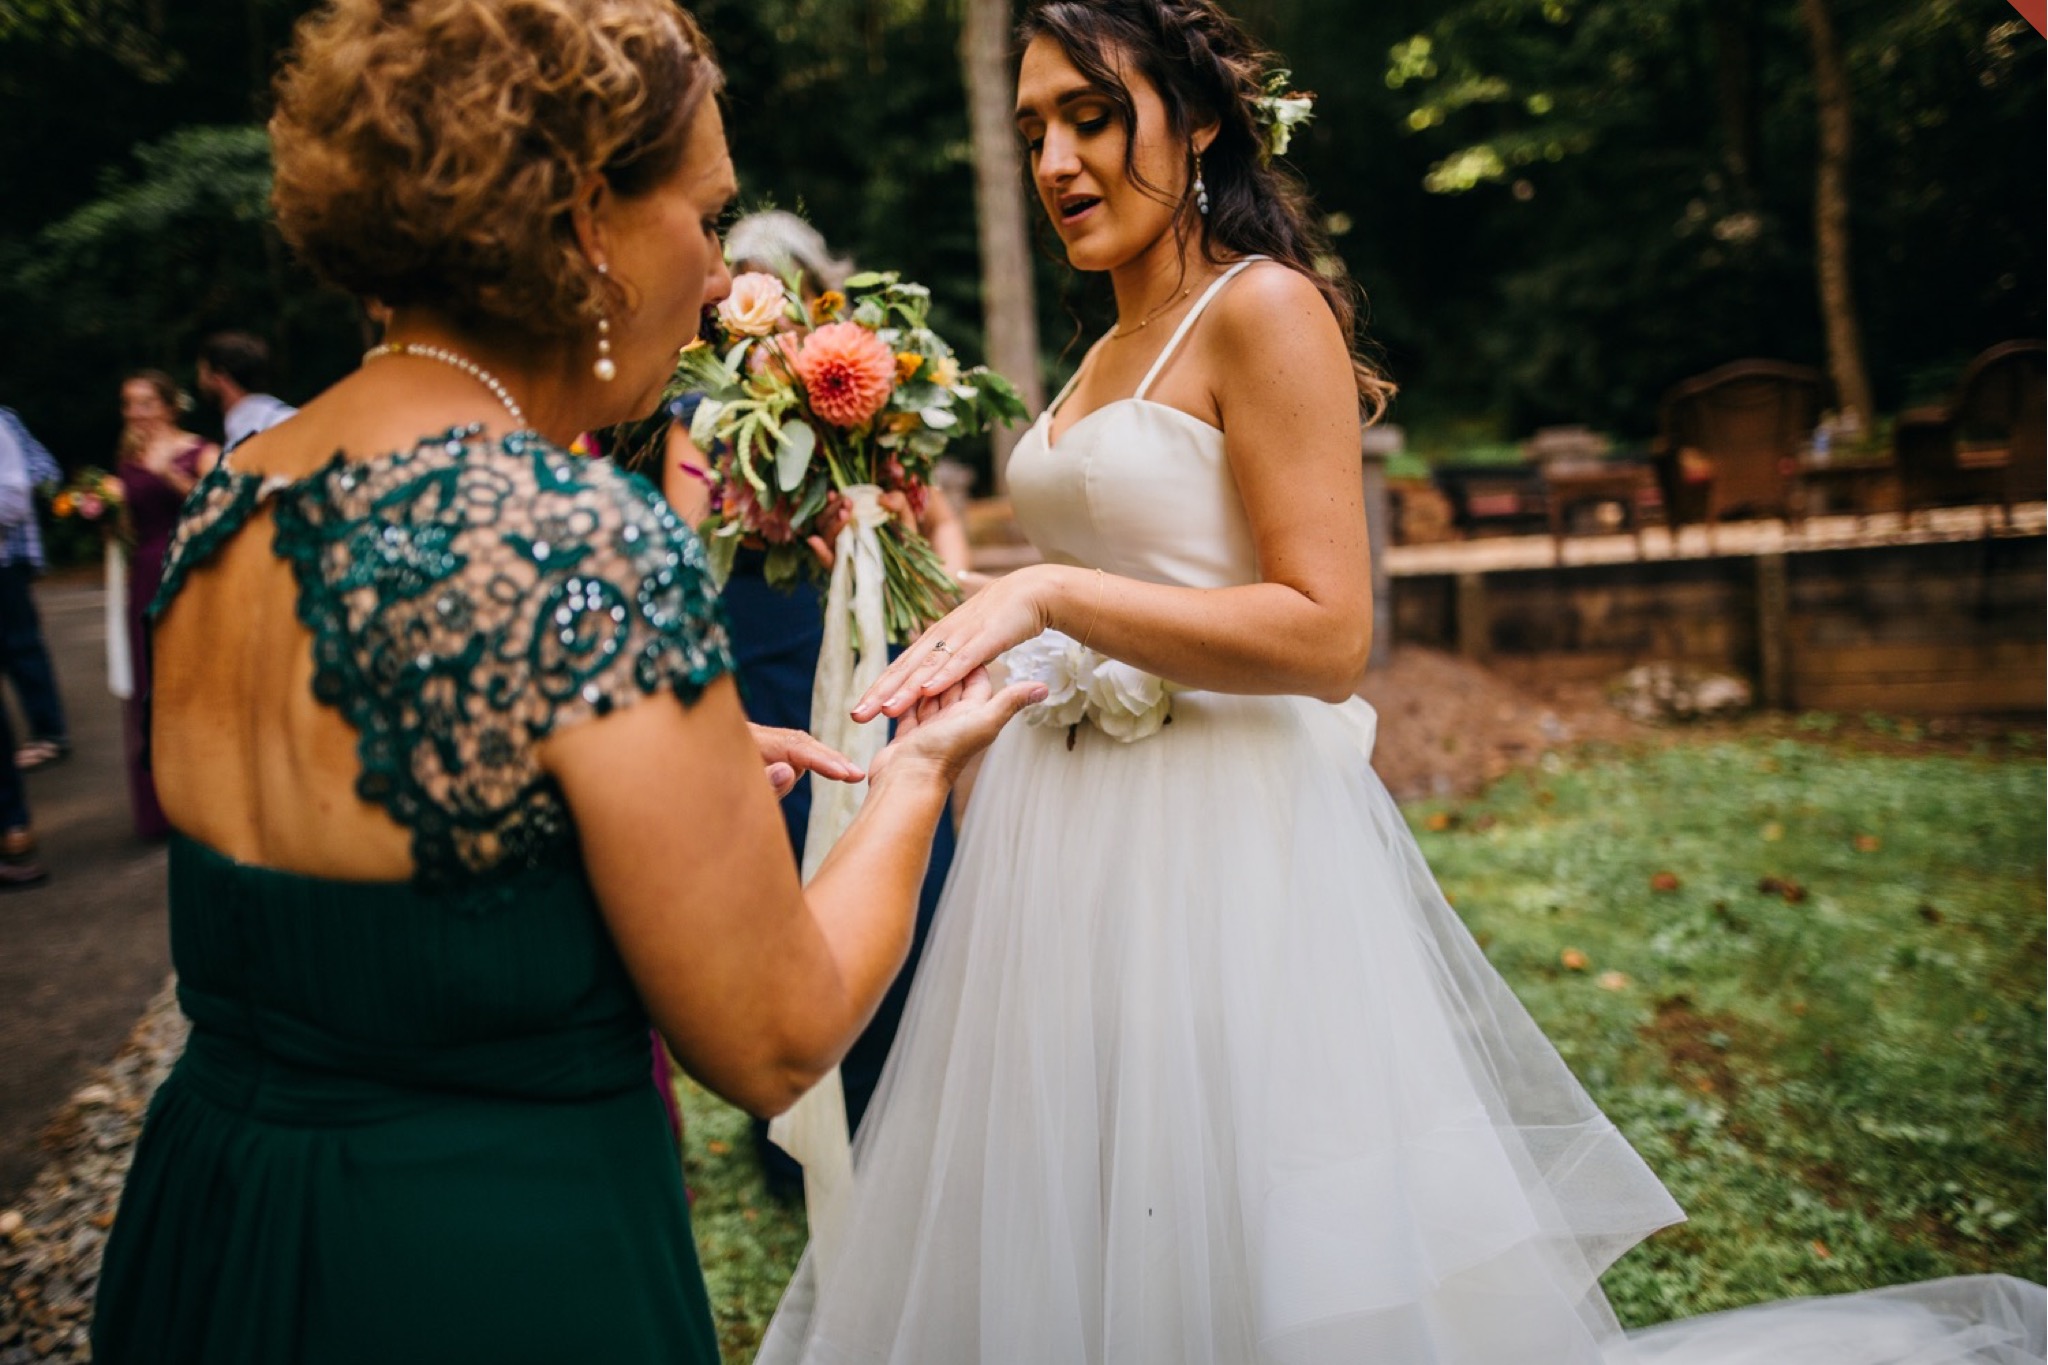 The bride shows off her ring to a wedding guest.